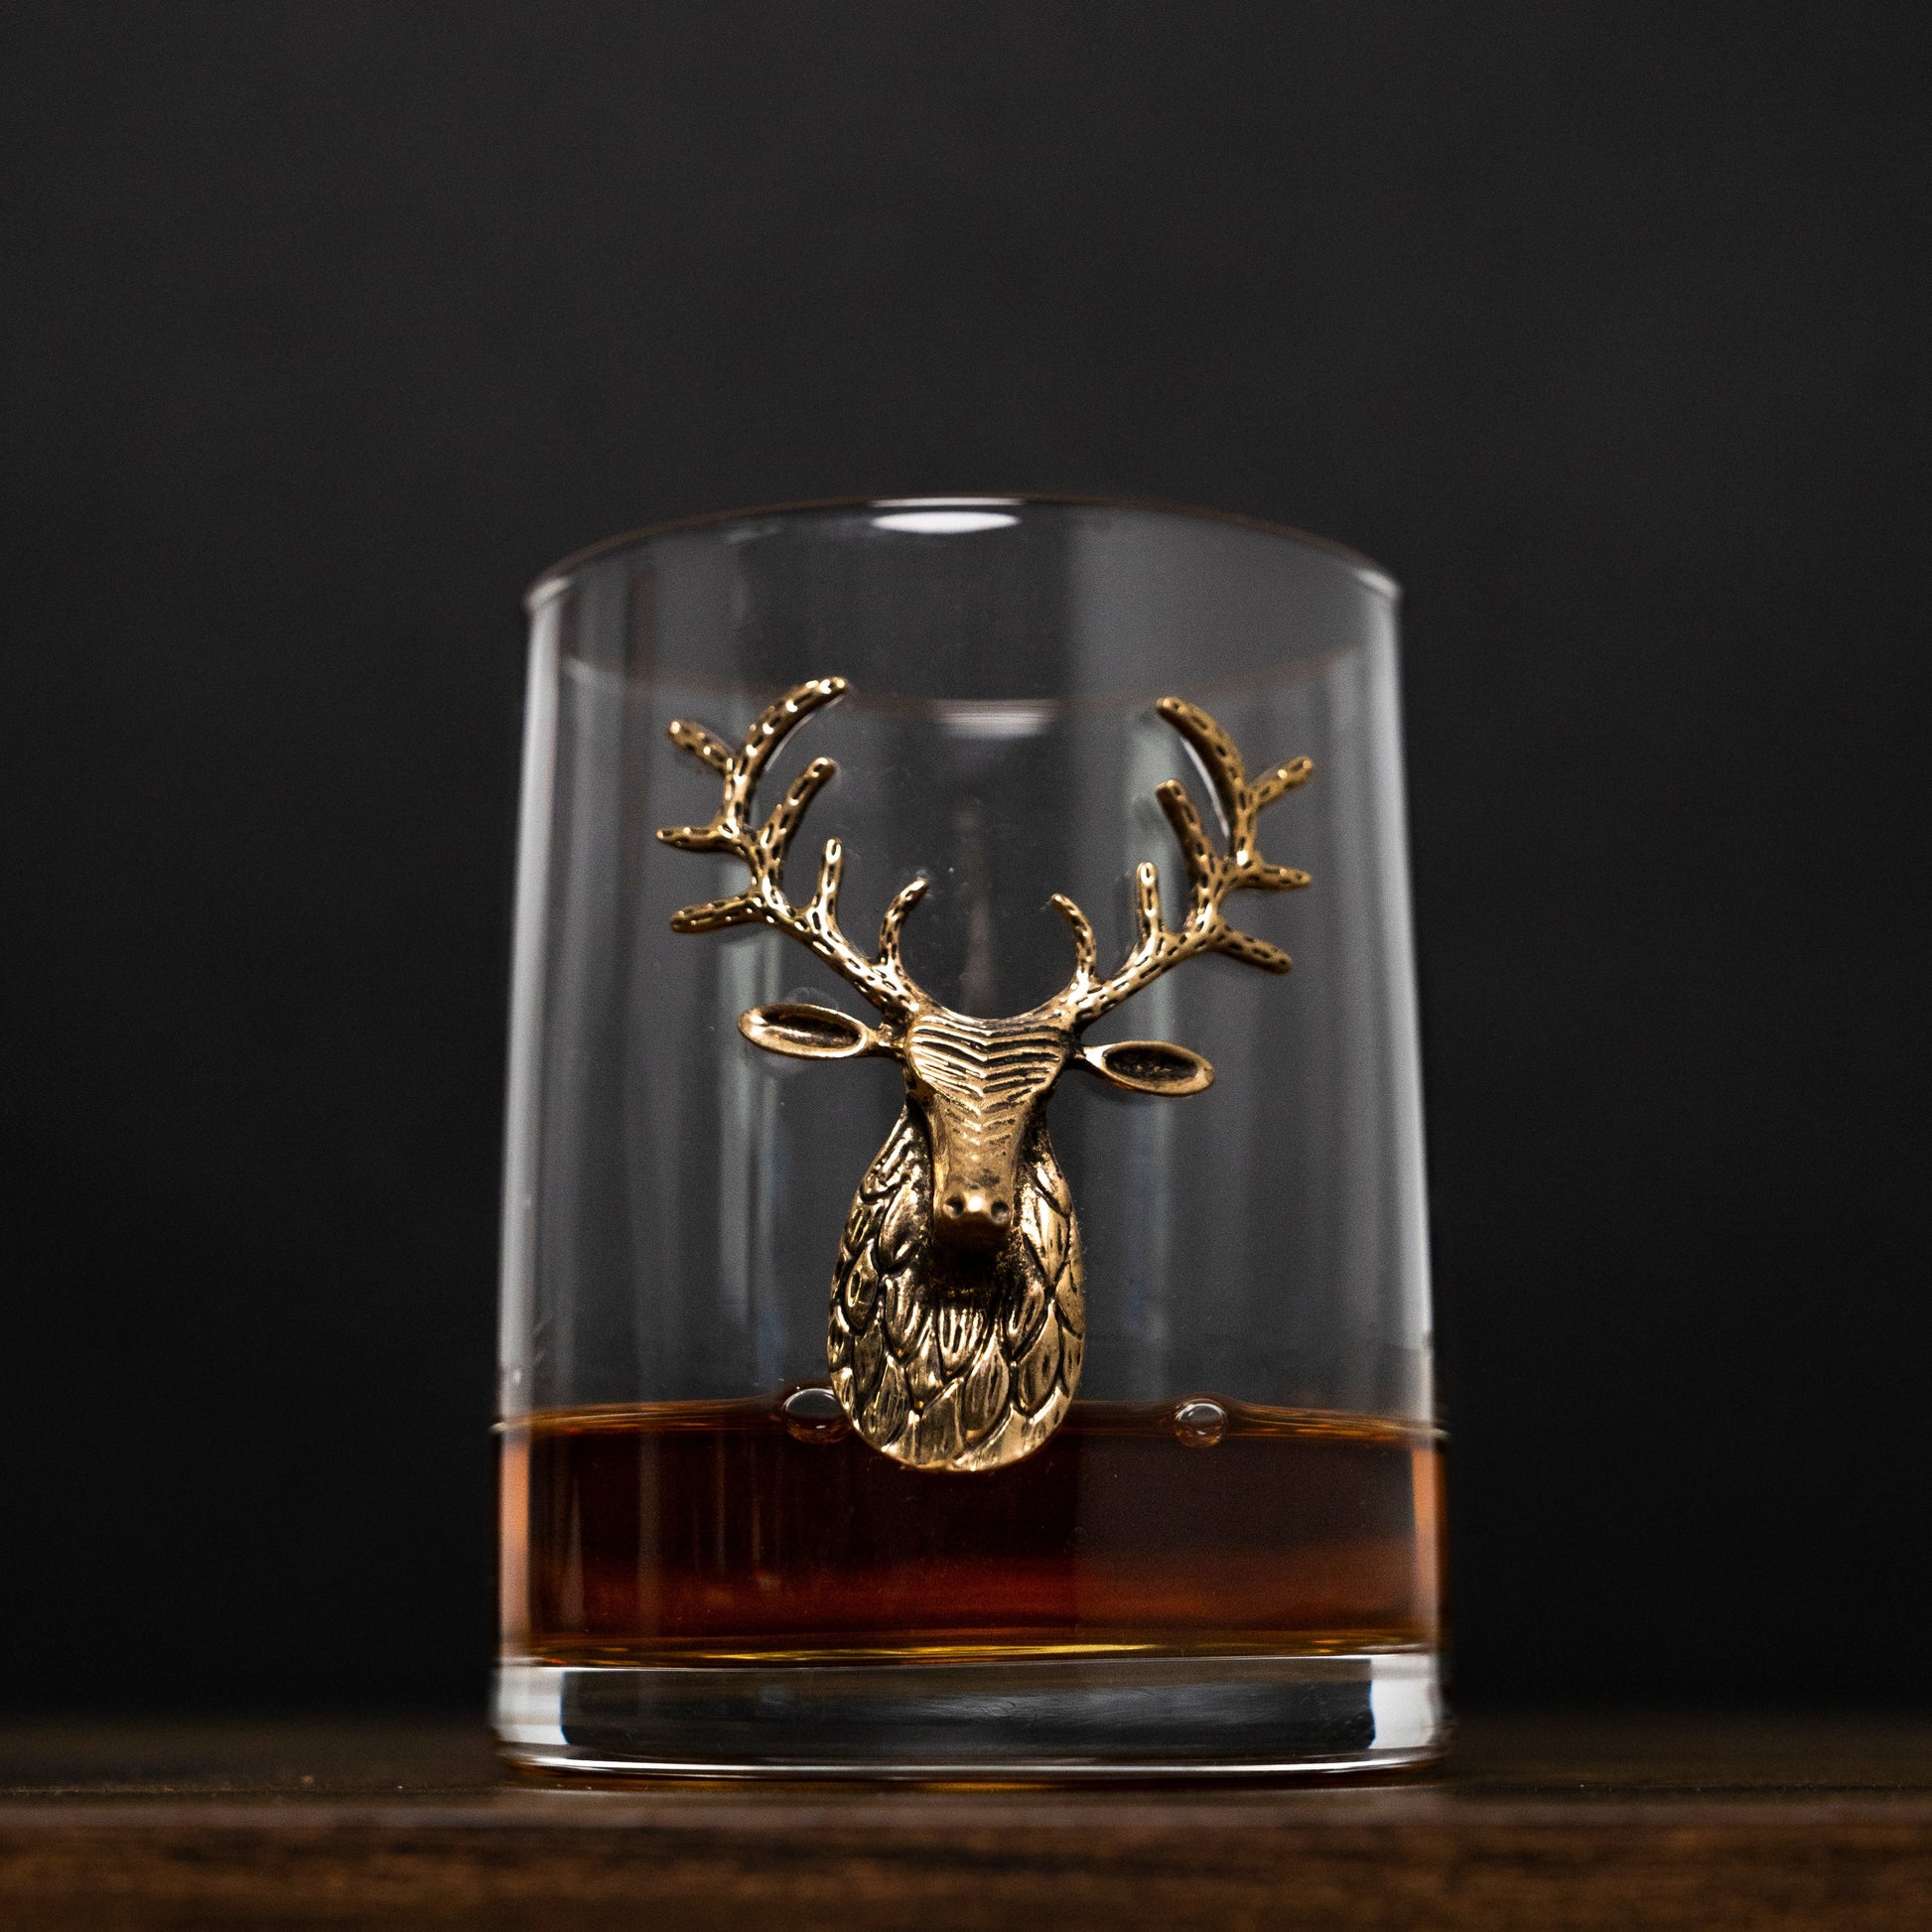 stag whiskey, stag glasses, stag whiskey glass set, stag whiskey glasses, stag glass set, gold whiskey glass, gold whiskey glasses